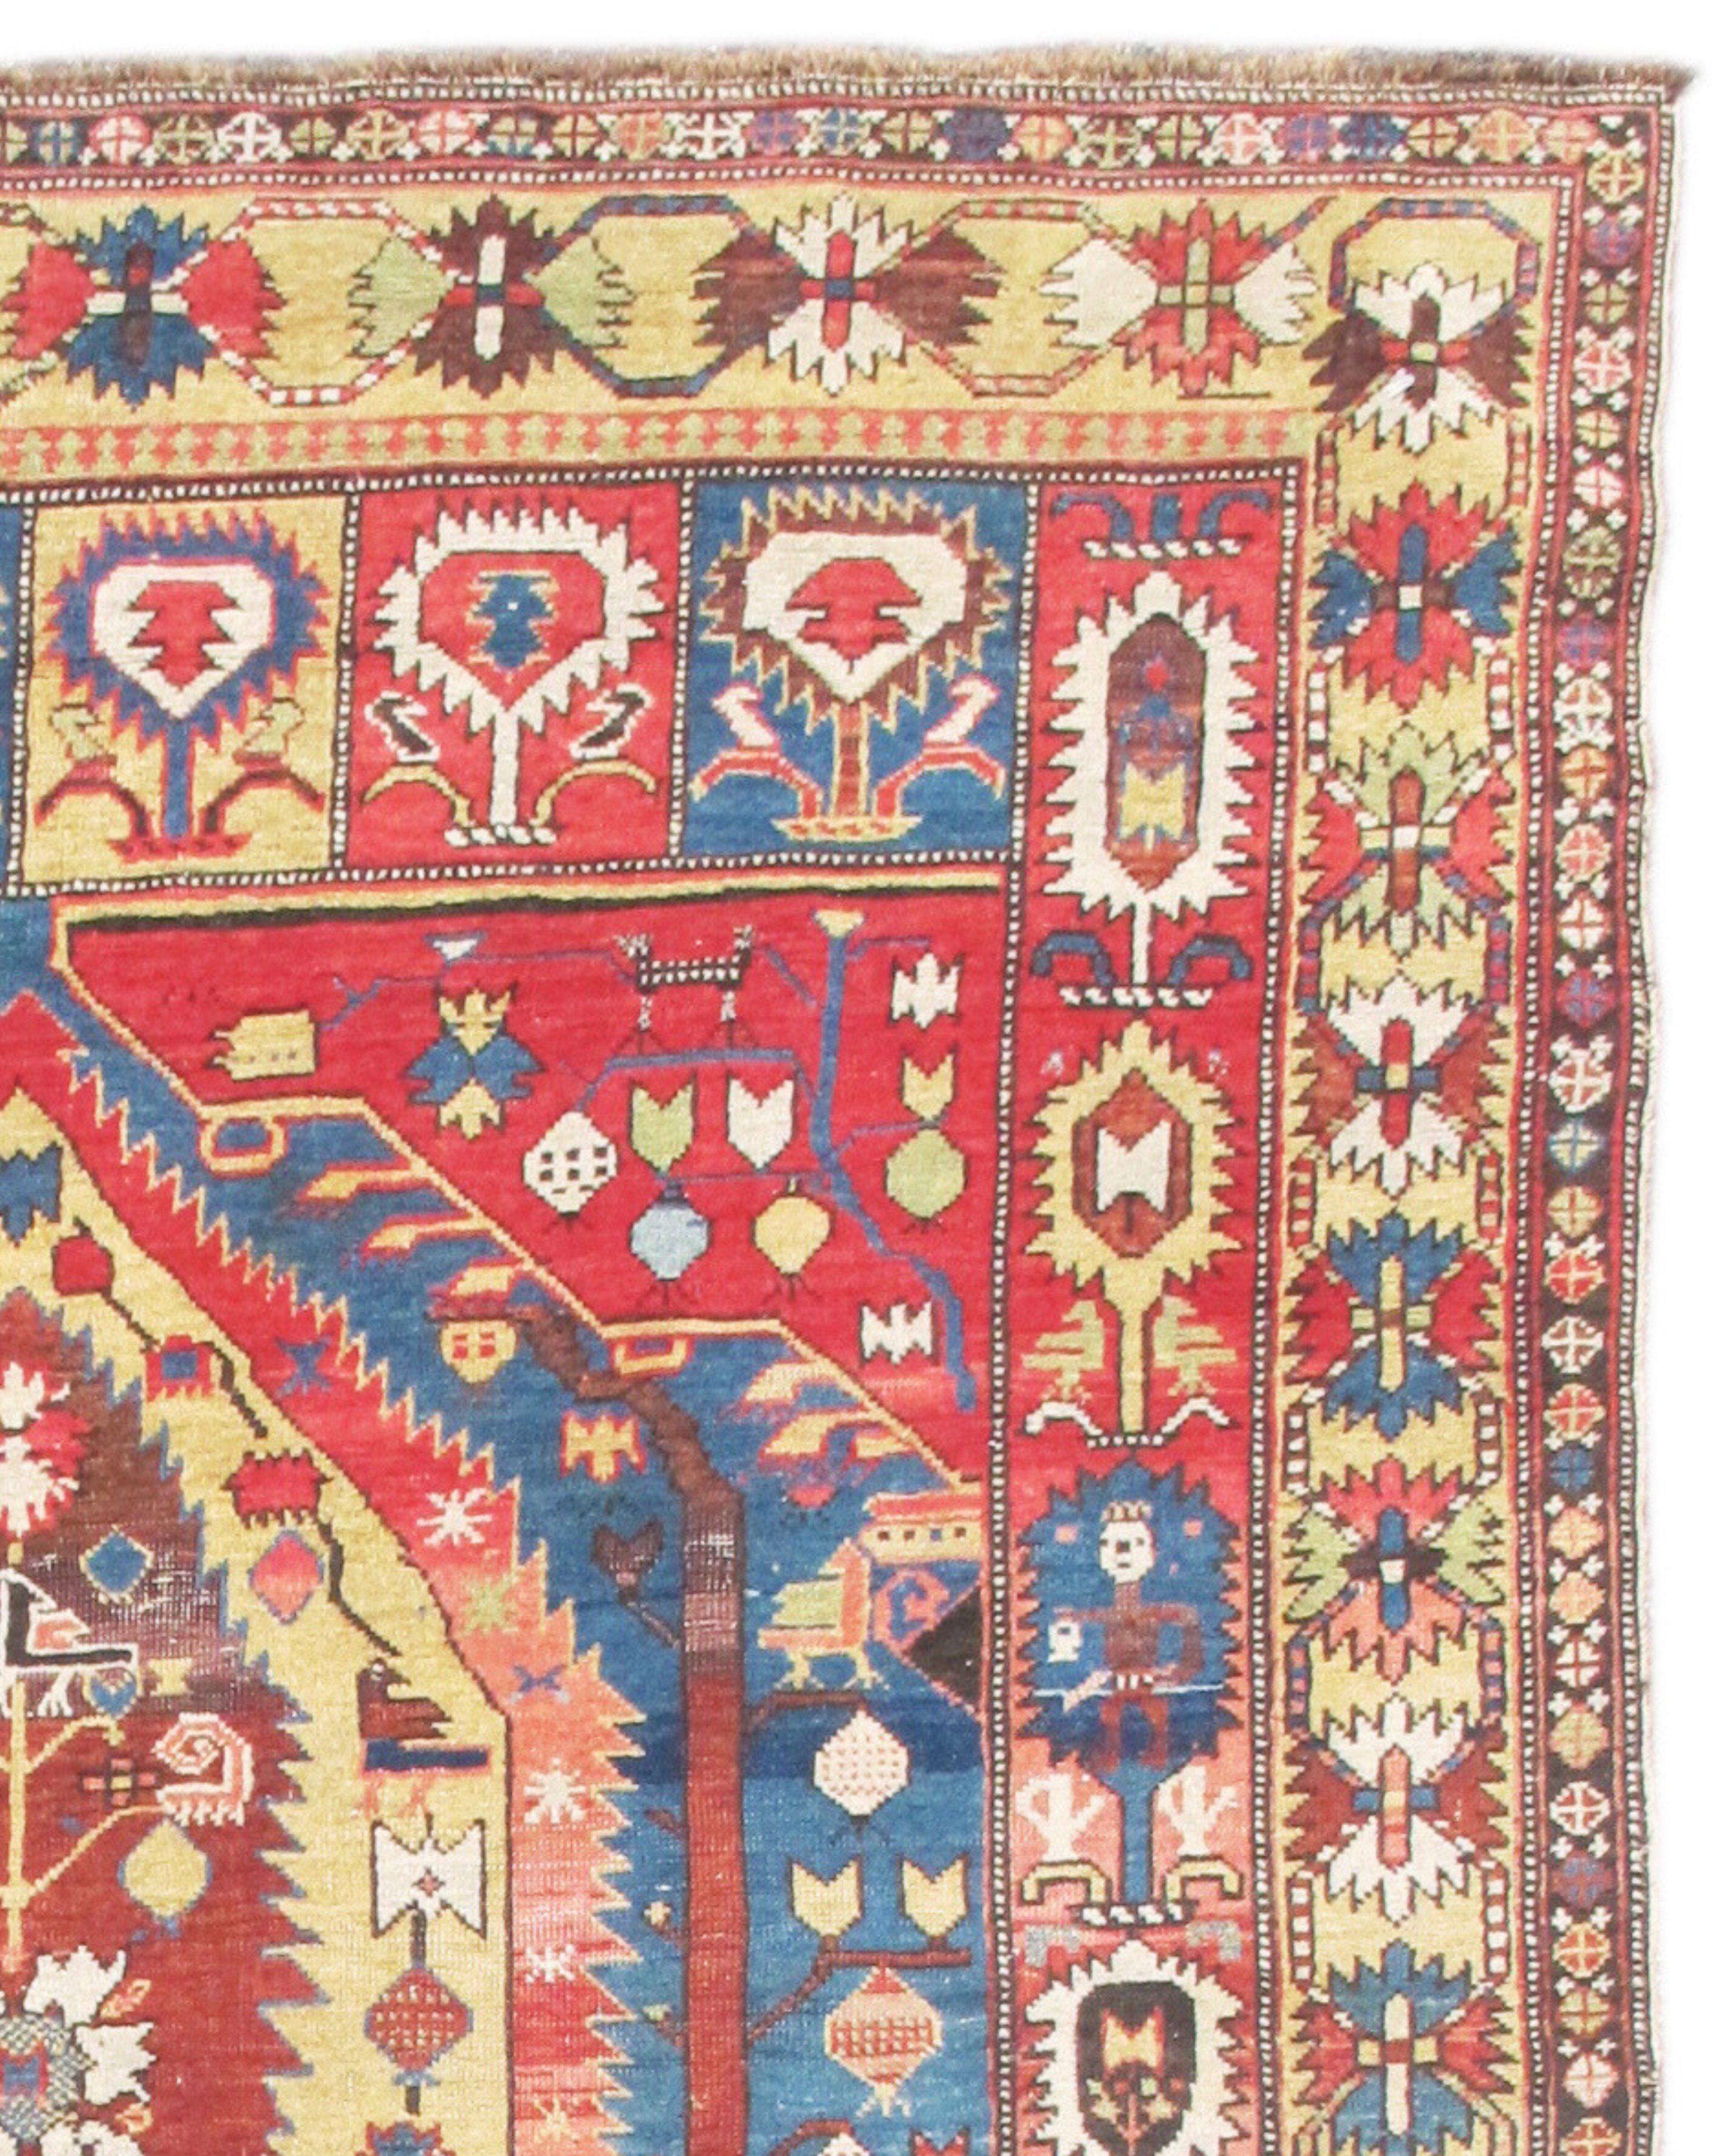 Hand-Woven Antique Caucasian Blue and Red Shirvan Rug, c. 1900 For Sale